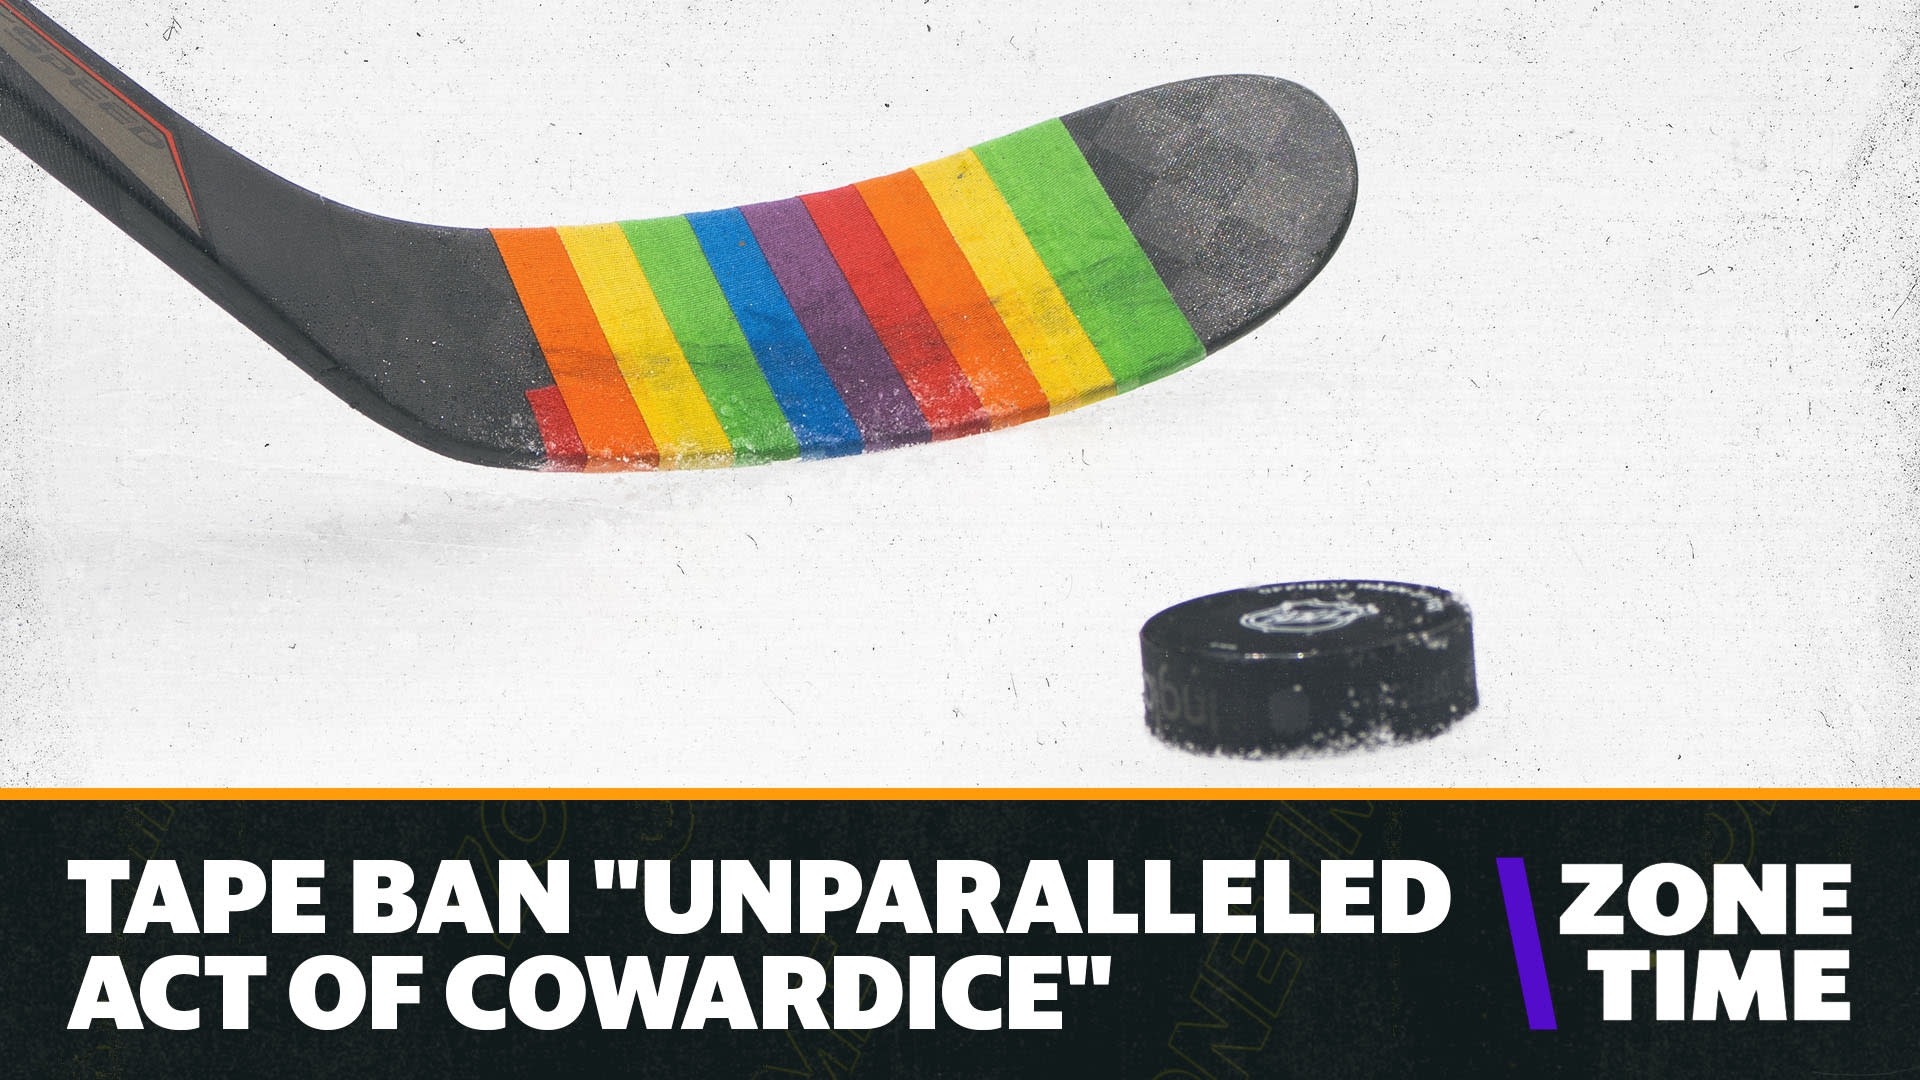 NHL bans players from displaying Pride tape